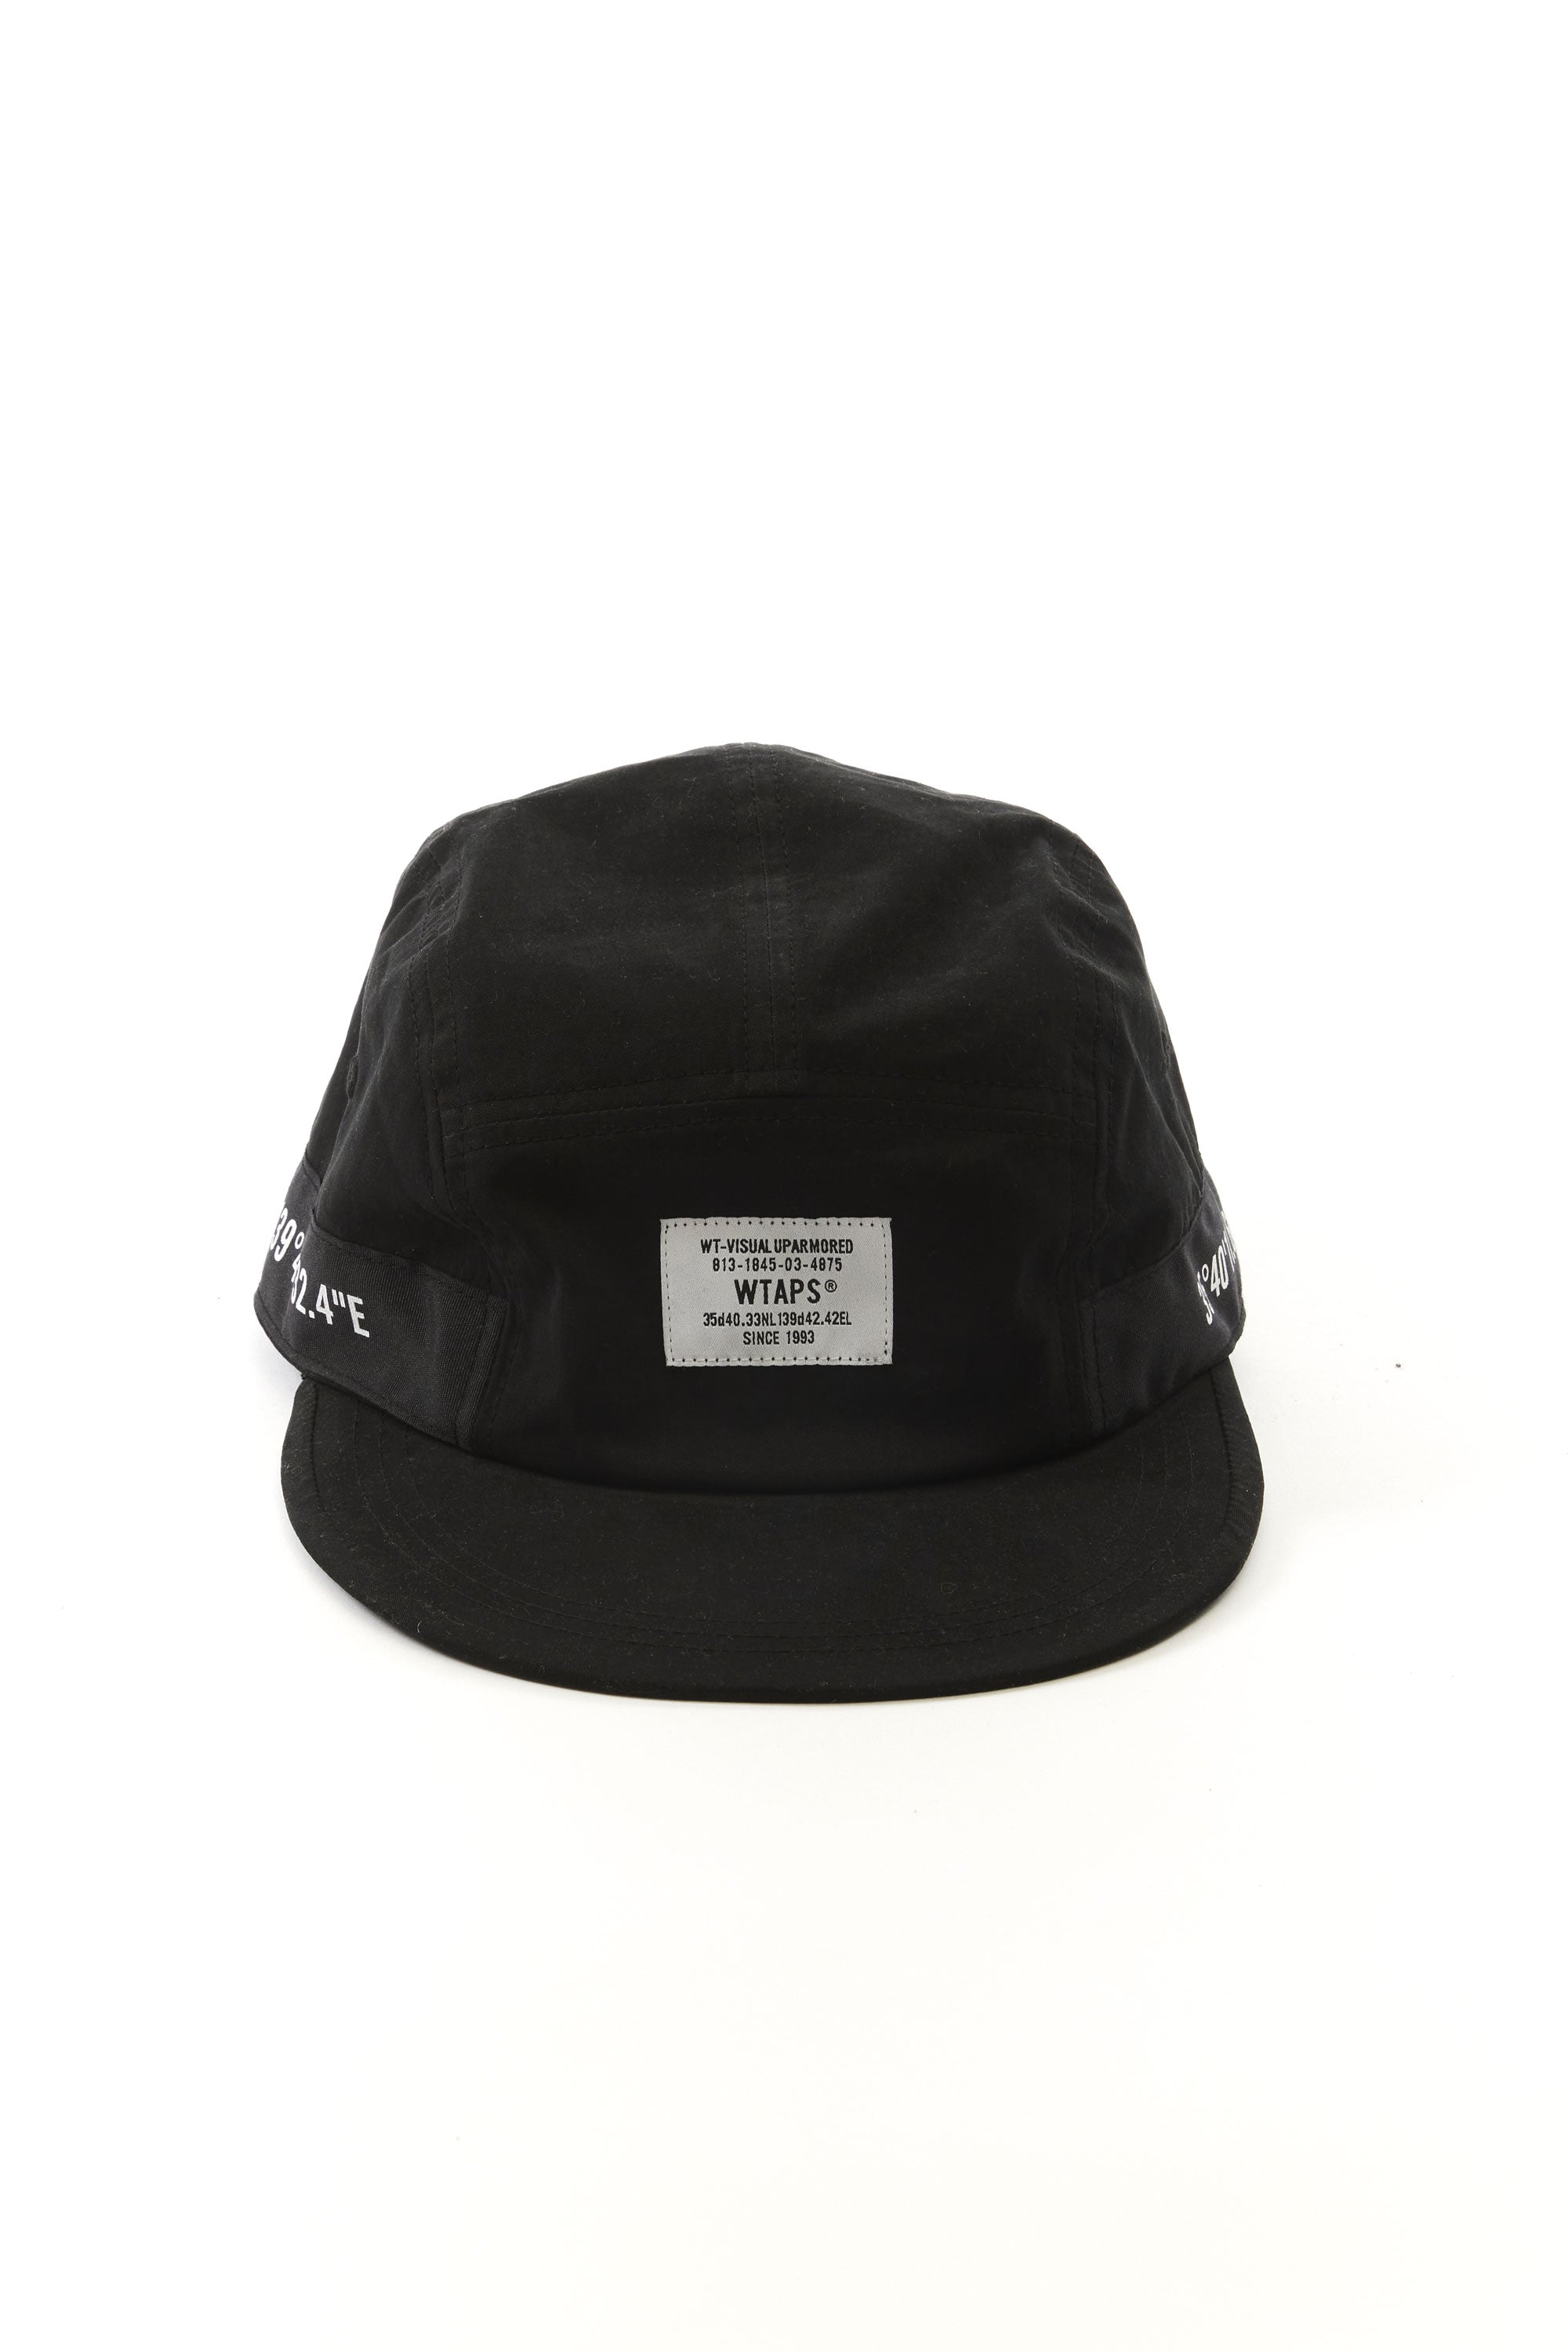 The WTAPS - T-7 GPS WEATHER CAP BLACK available online with global shipping, and in PAM Stores Melbourne and Sydney.